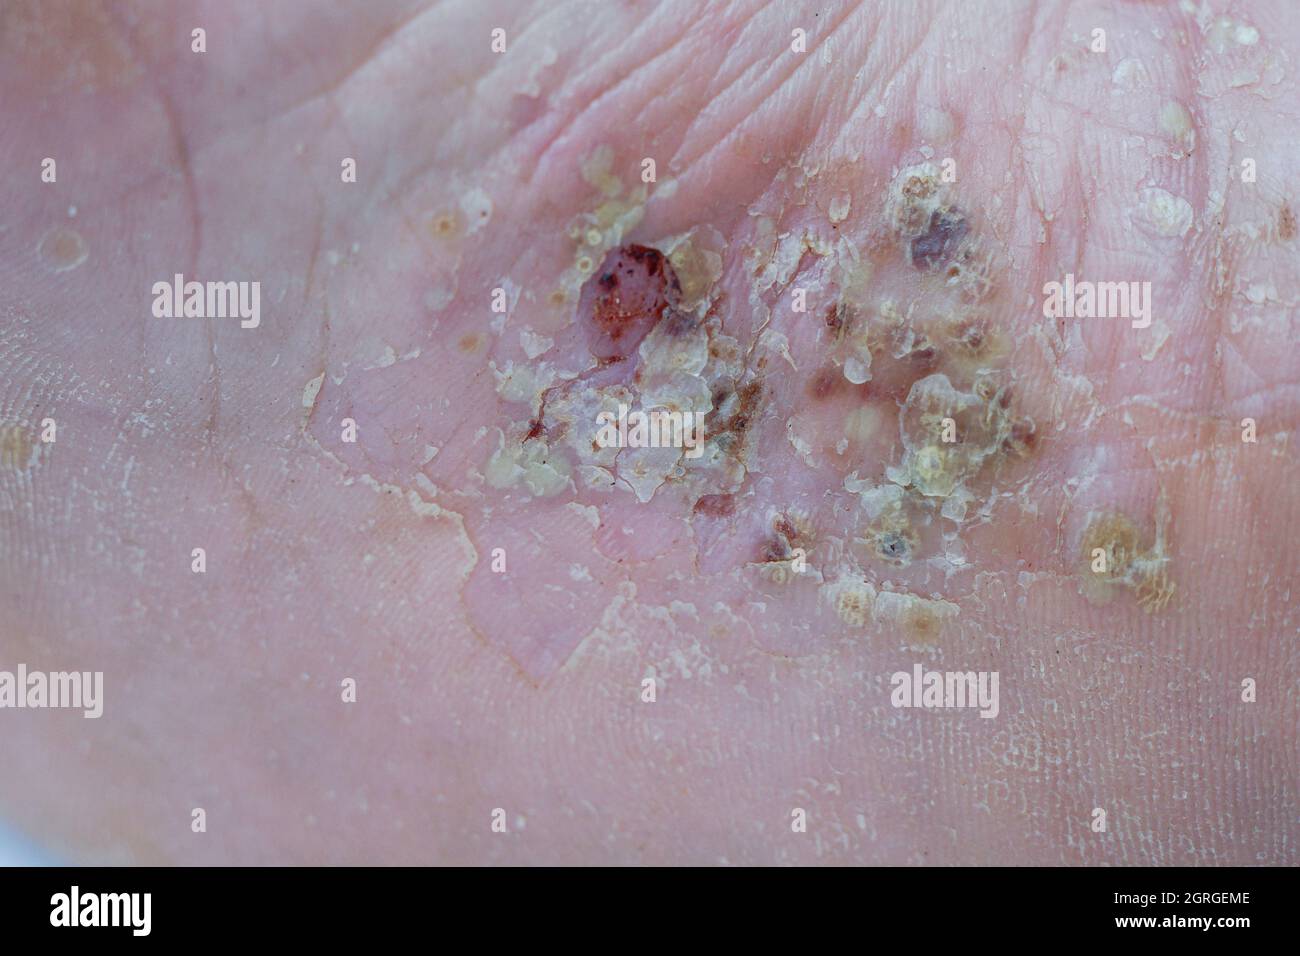 severe pustular psoriasis lesions on  the sole of the foot Stock Photo